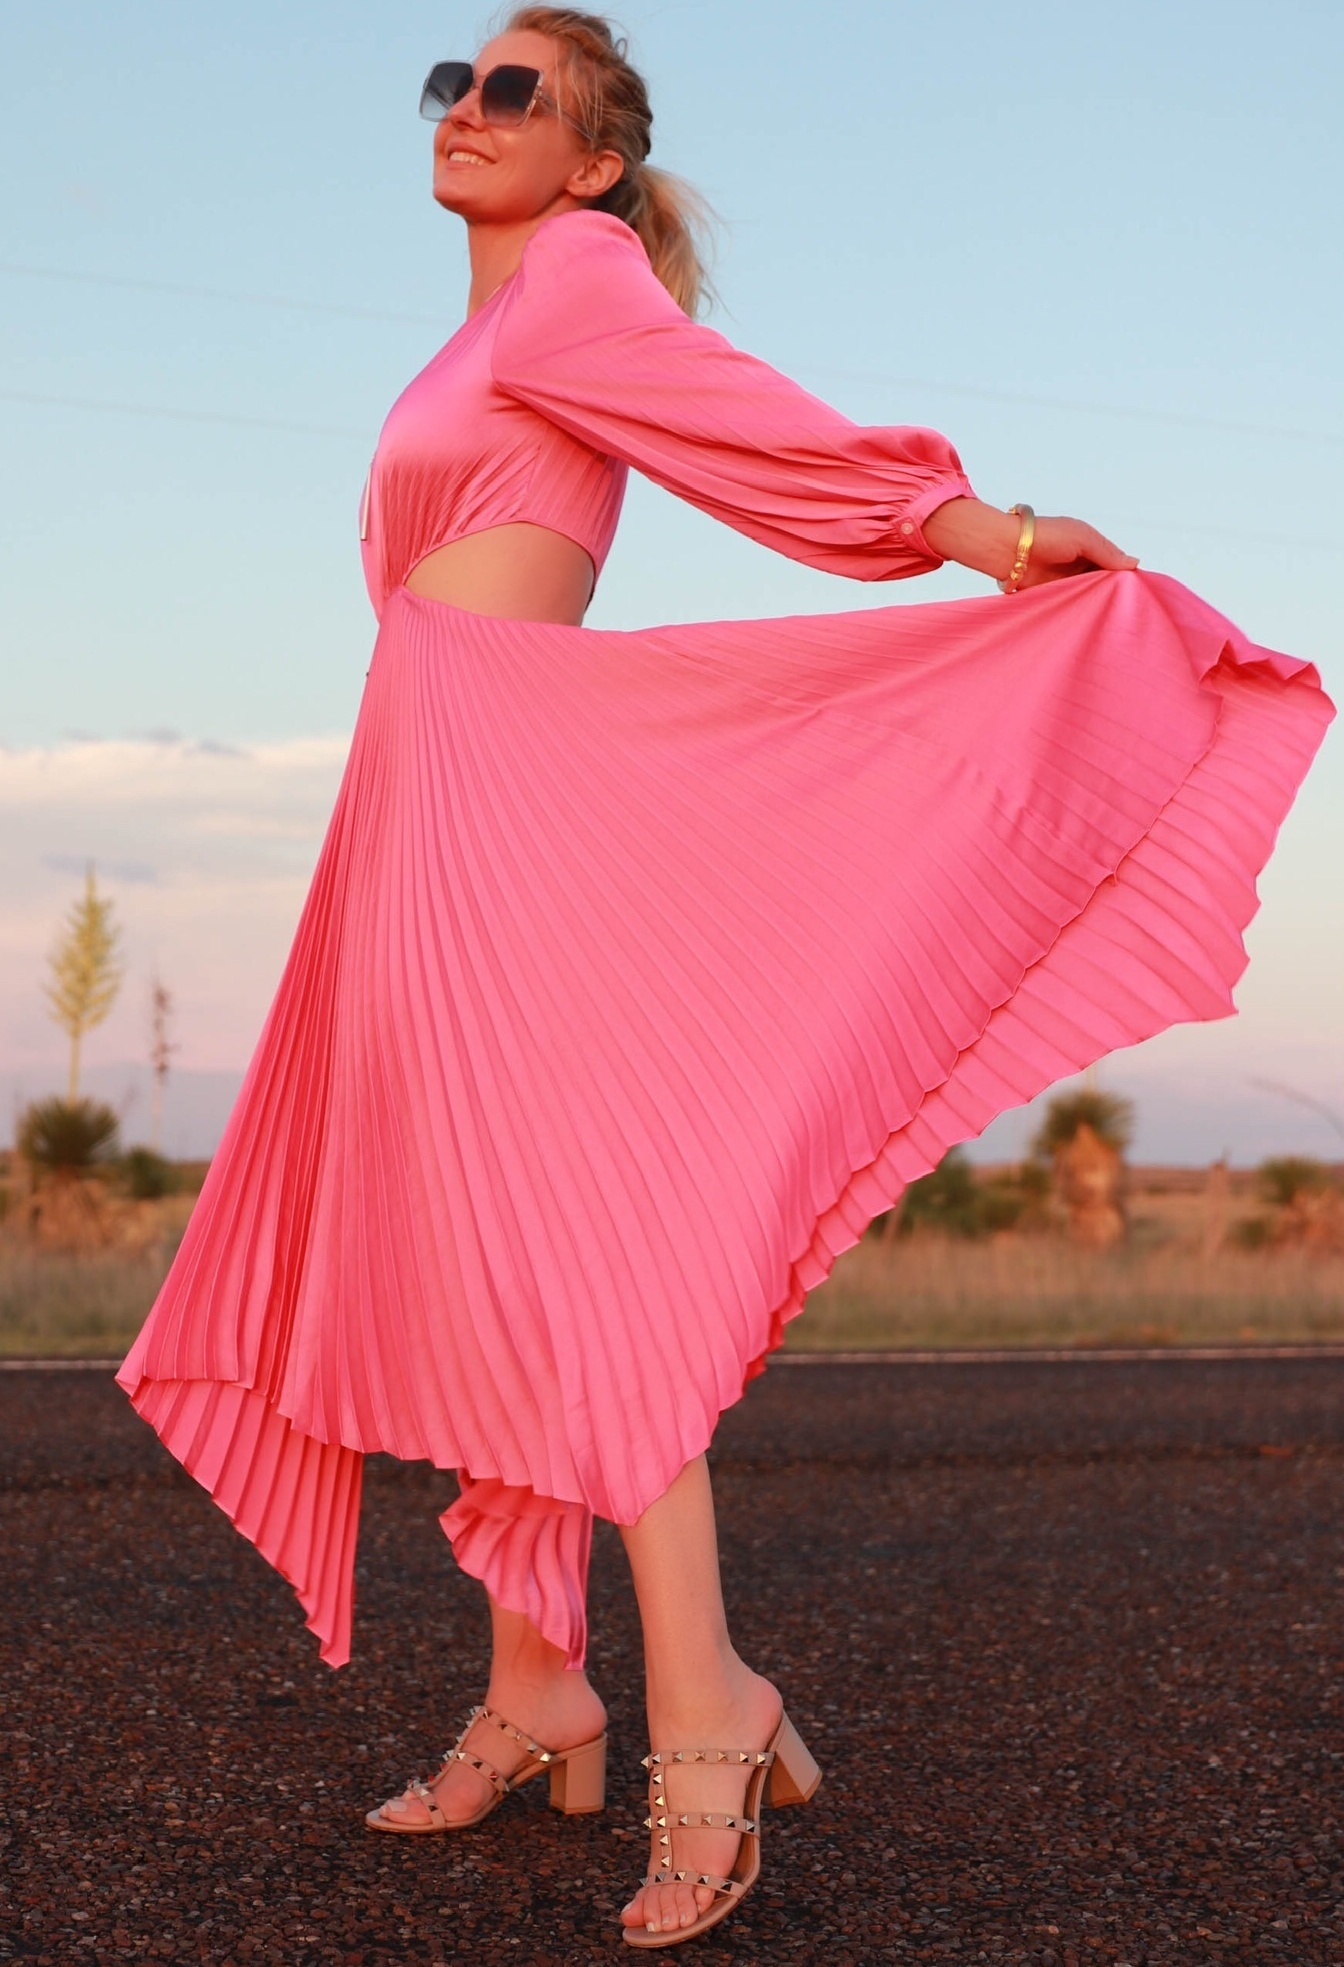 Pink Fashion Finds, Fashion blogger Erin Busbee of Busbee Style wearing a pink pleated dress by A.L.C. with Valentino Rockstud sandals walking in the road in South Texas